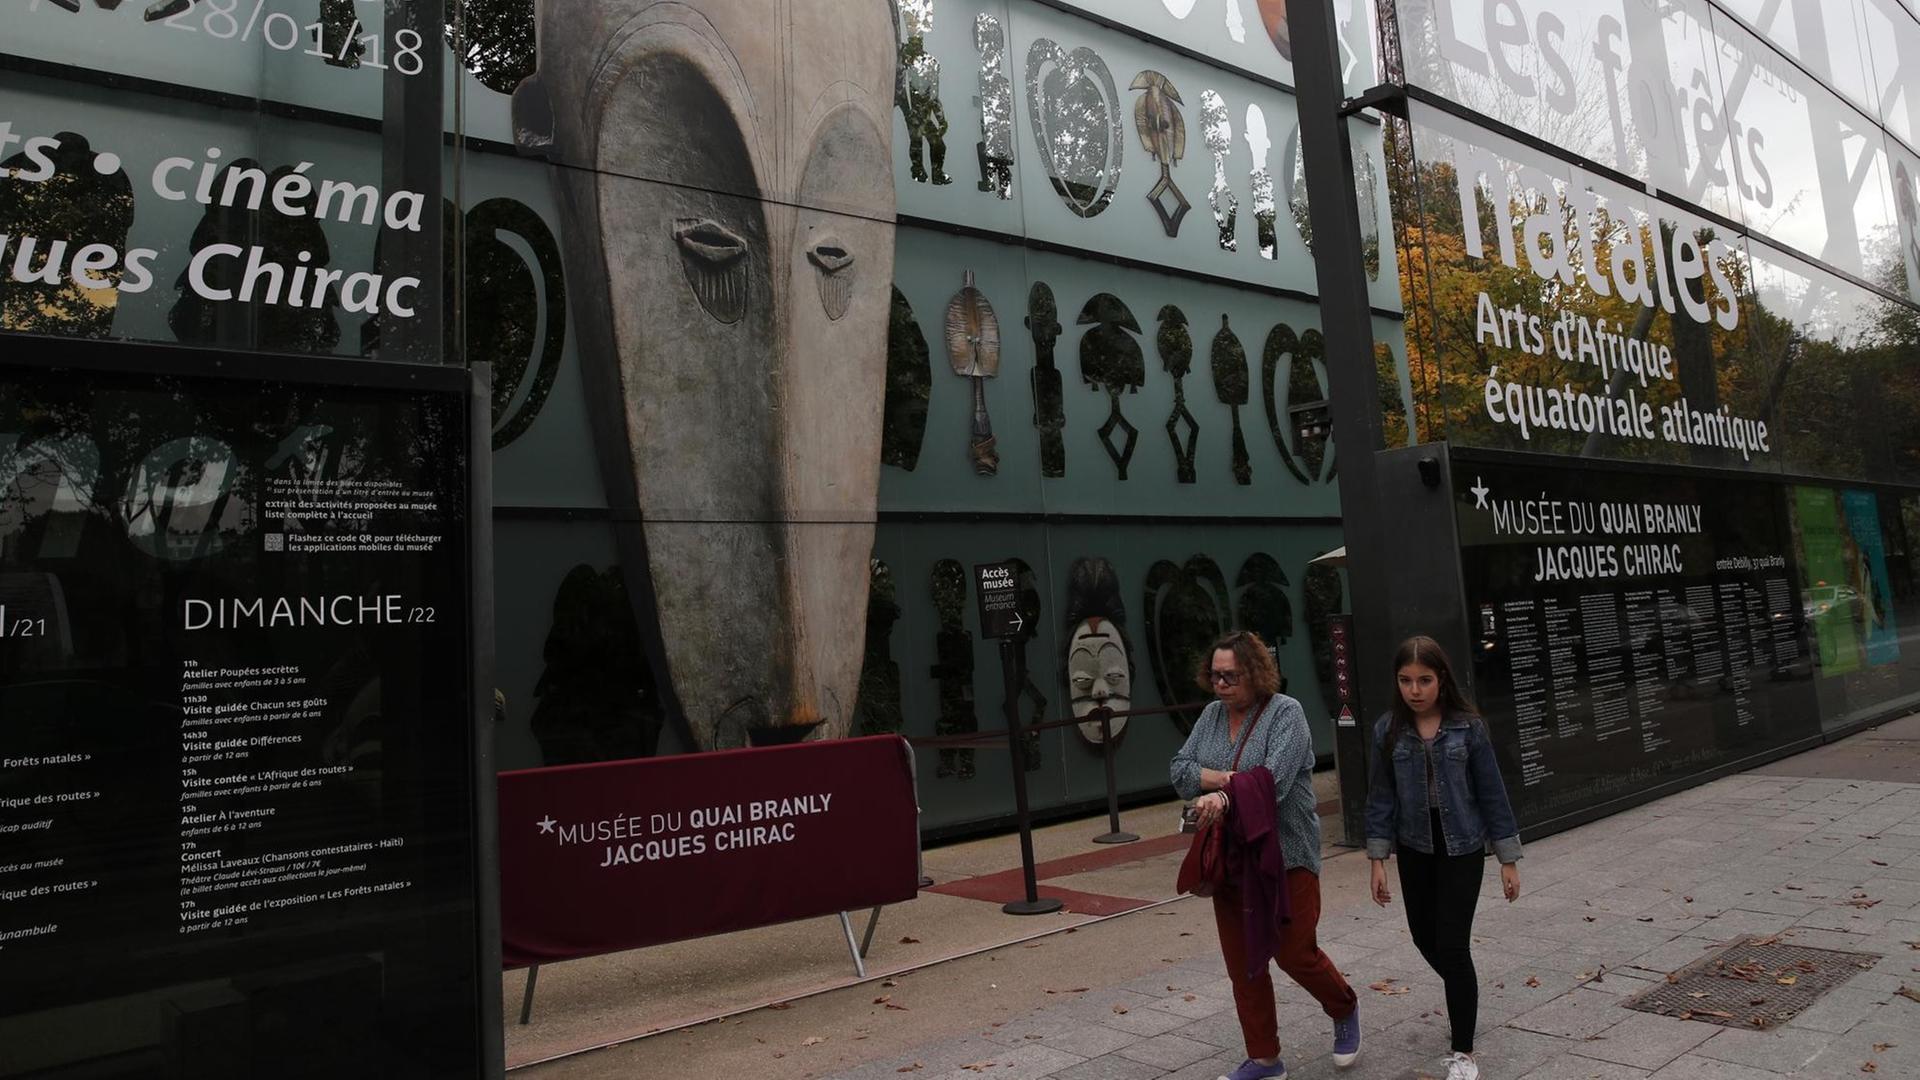 The Quai Branly museum is pictured in Paris, Wednesday Oct. 18, 2017. The musee du Quai Branly-Jacques Chirac is a museum featuring the indigenous art and cultures of Africa, Asia, Oceania, and the Americas. (AP Photo/Christophe Ena) |